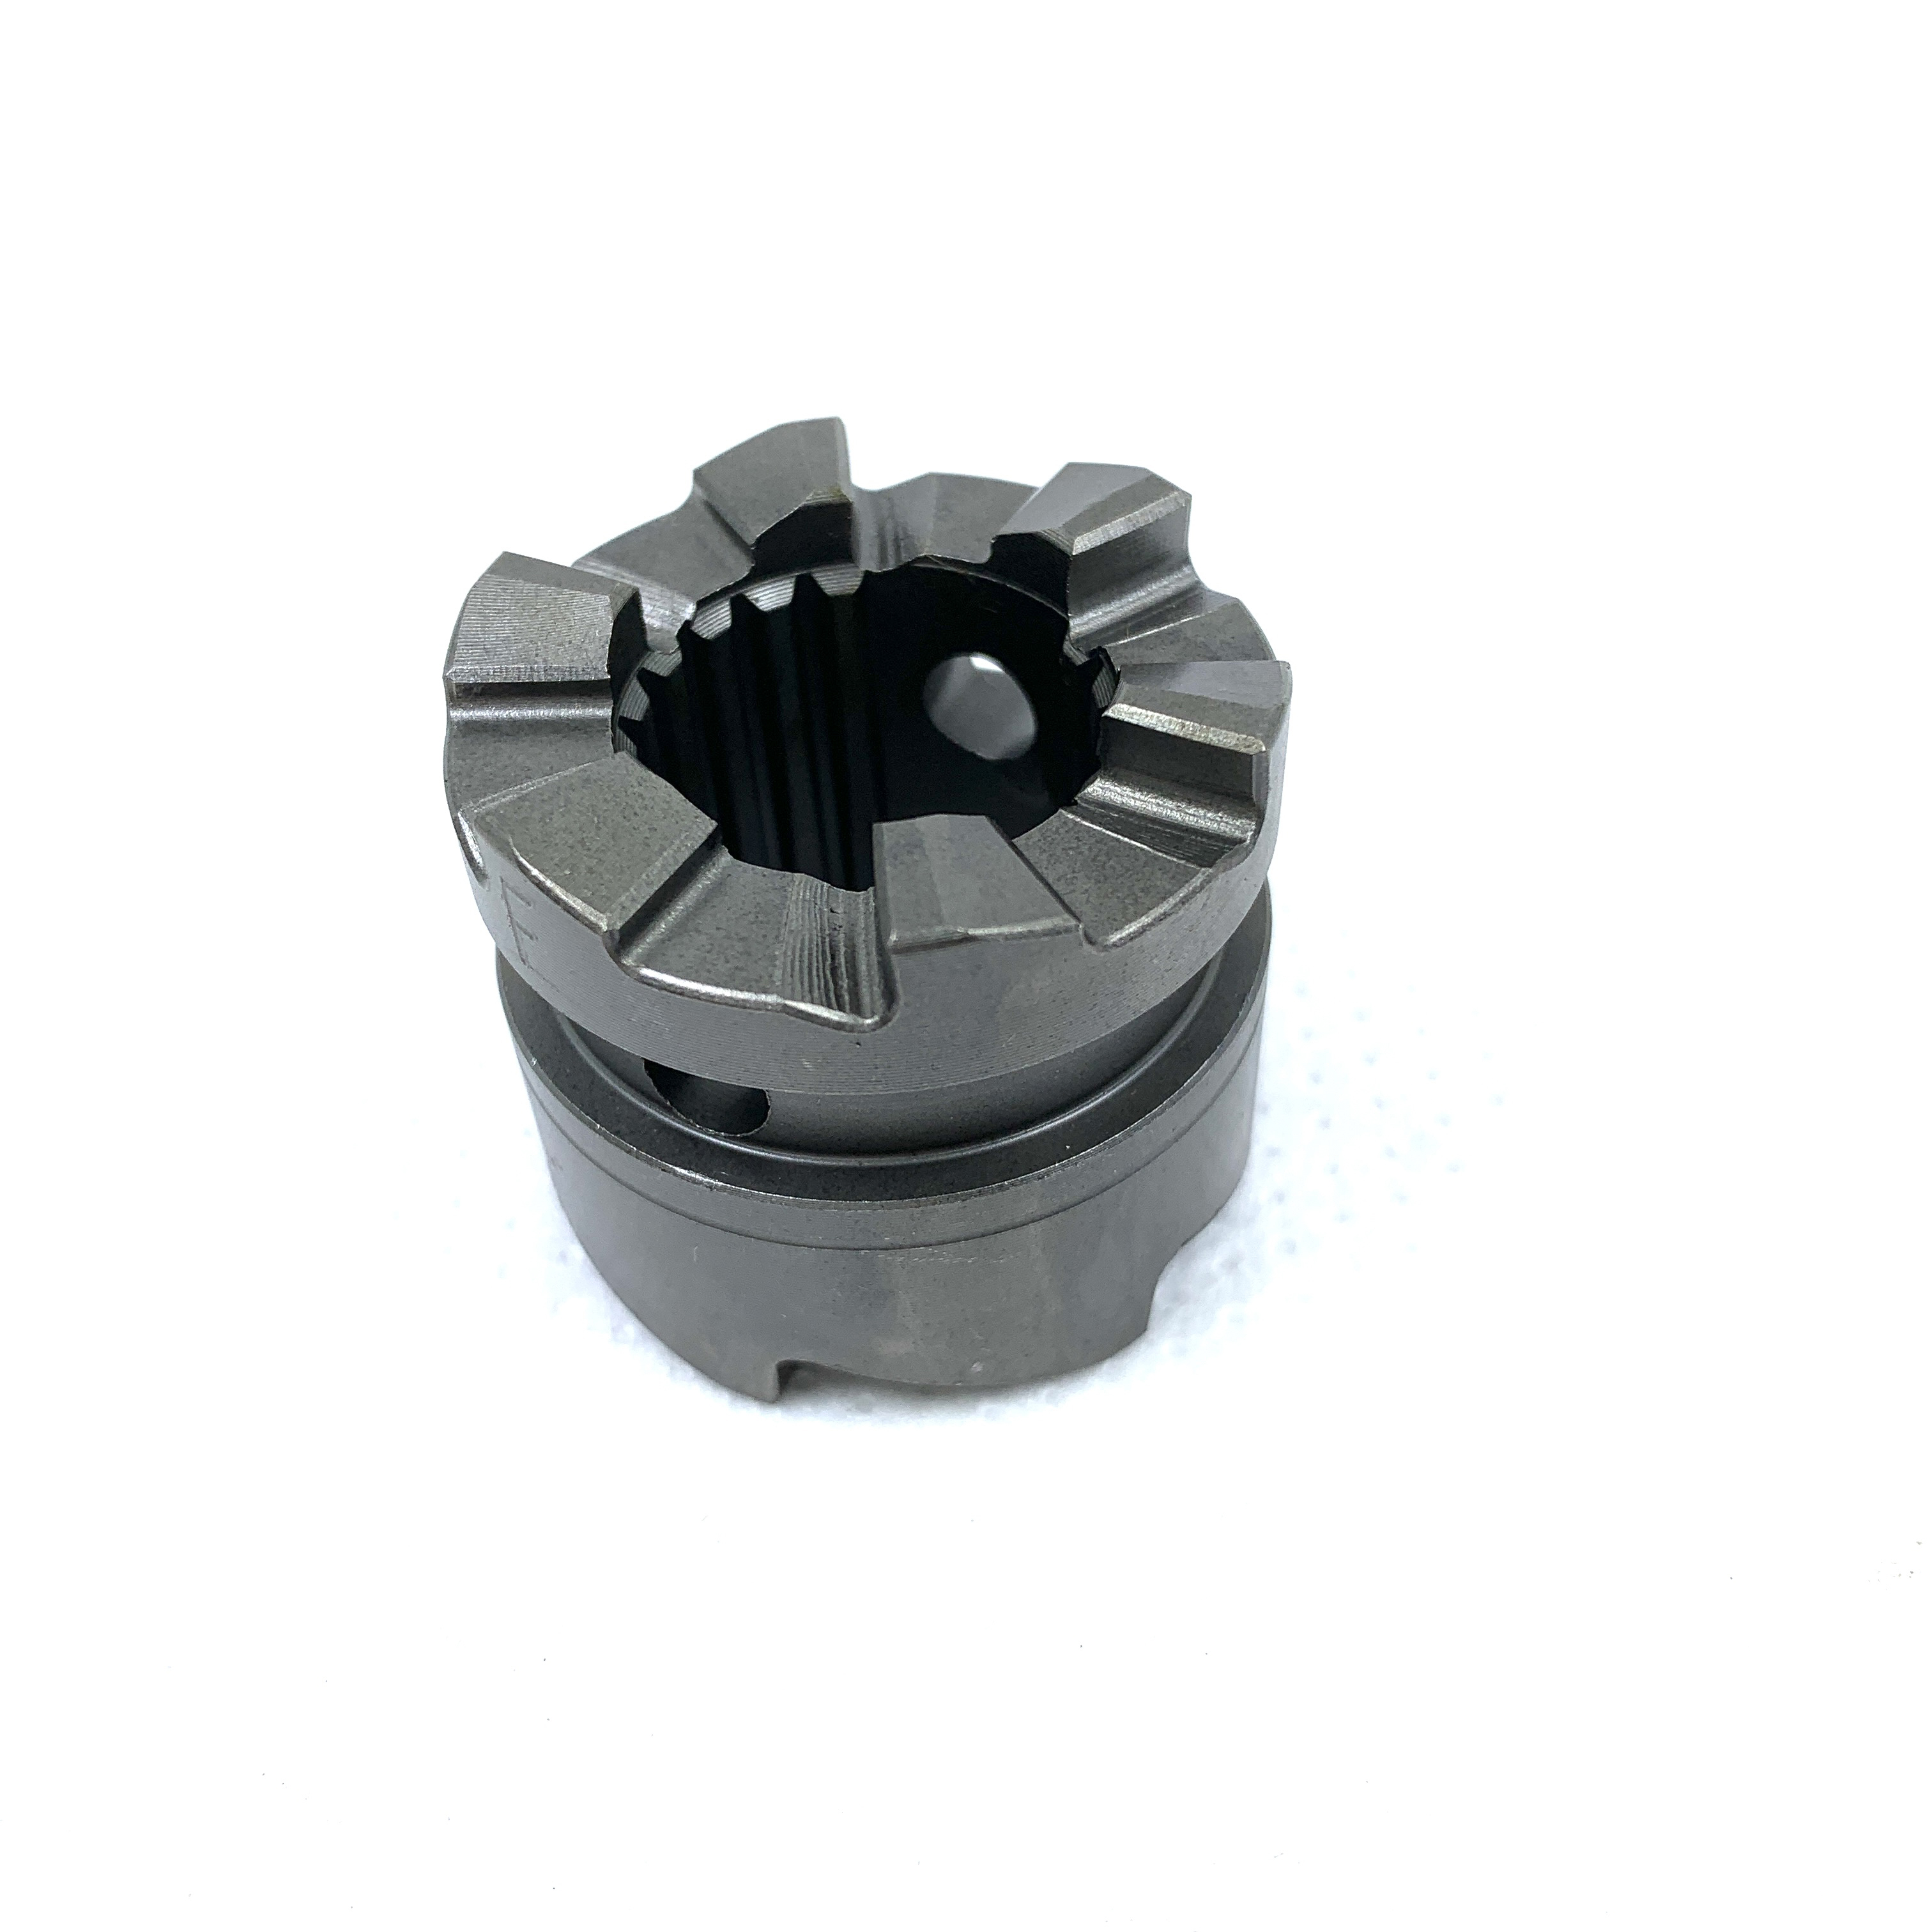 66T-45631 new Clutch Dog Replaces For Yamaha 40HP F30 F40 F40J Outboard Engine Motor part 66T-45631-01 66T-45631-00